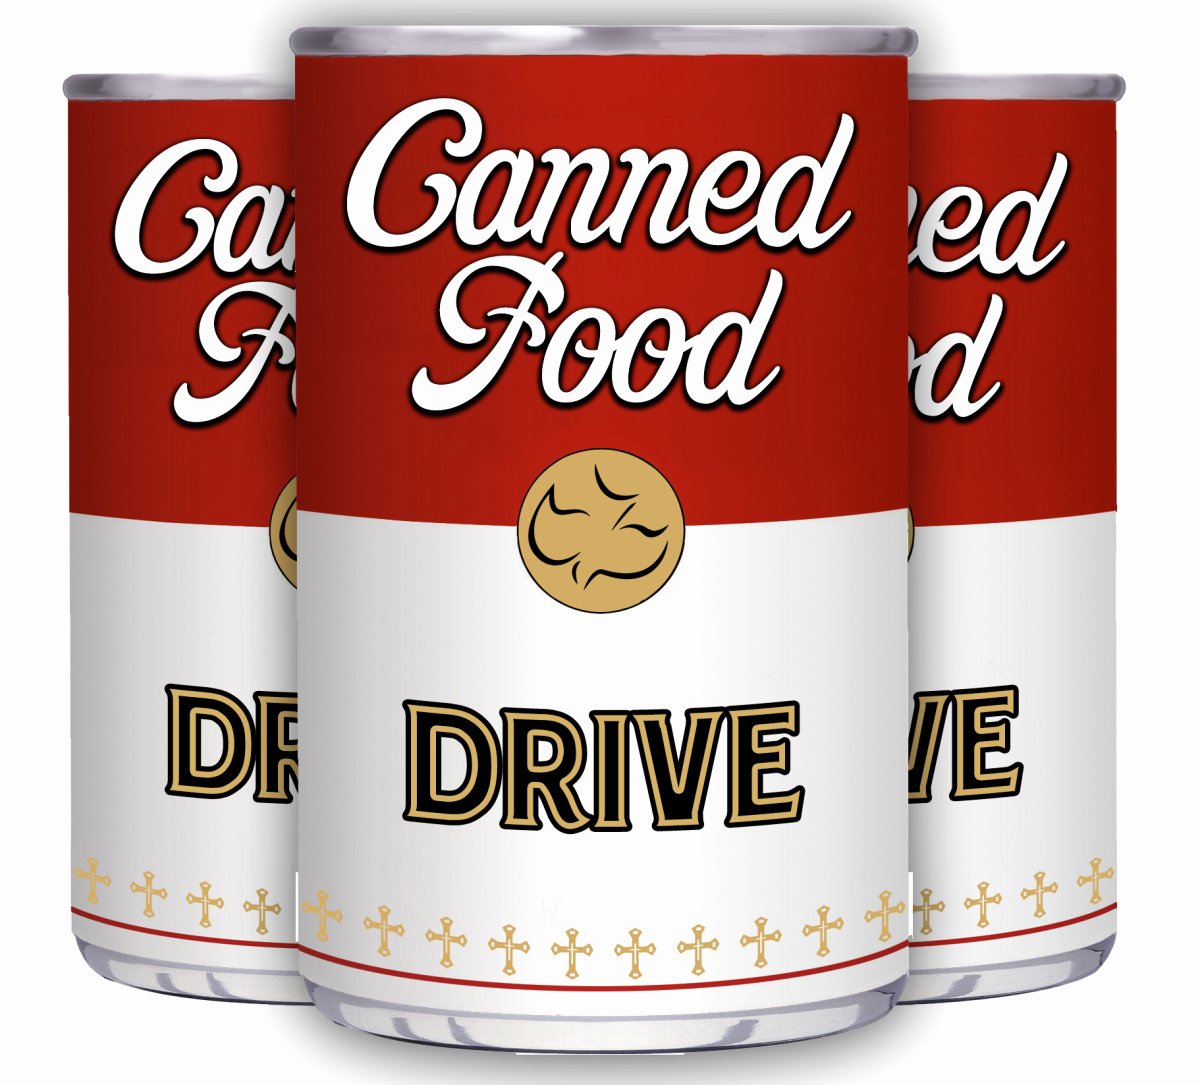 Can Food Drive Flyer Best Of Canned Food Drive